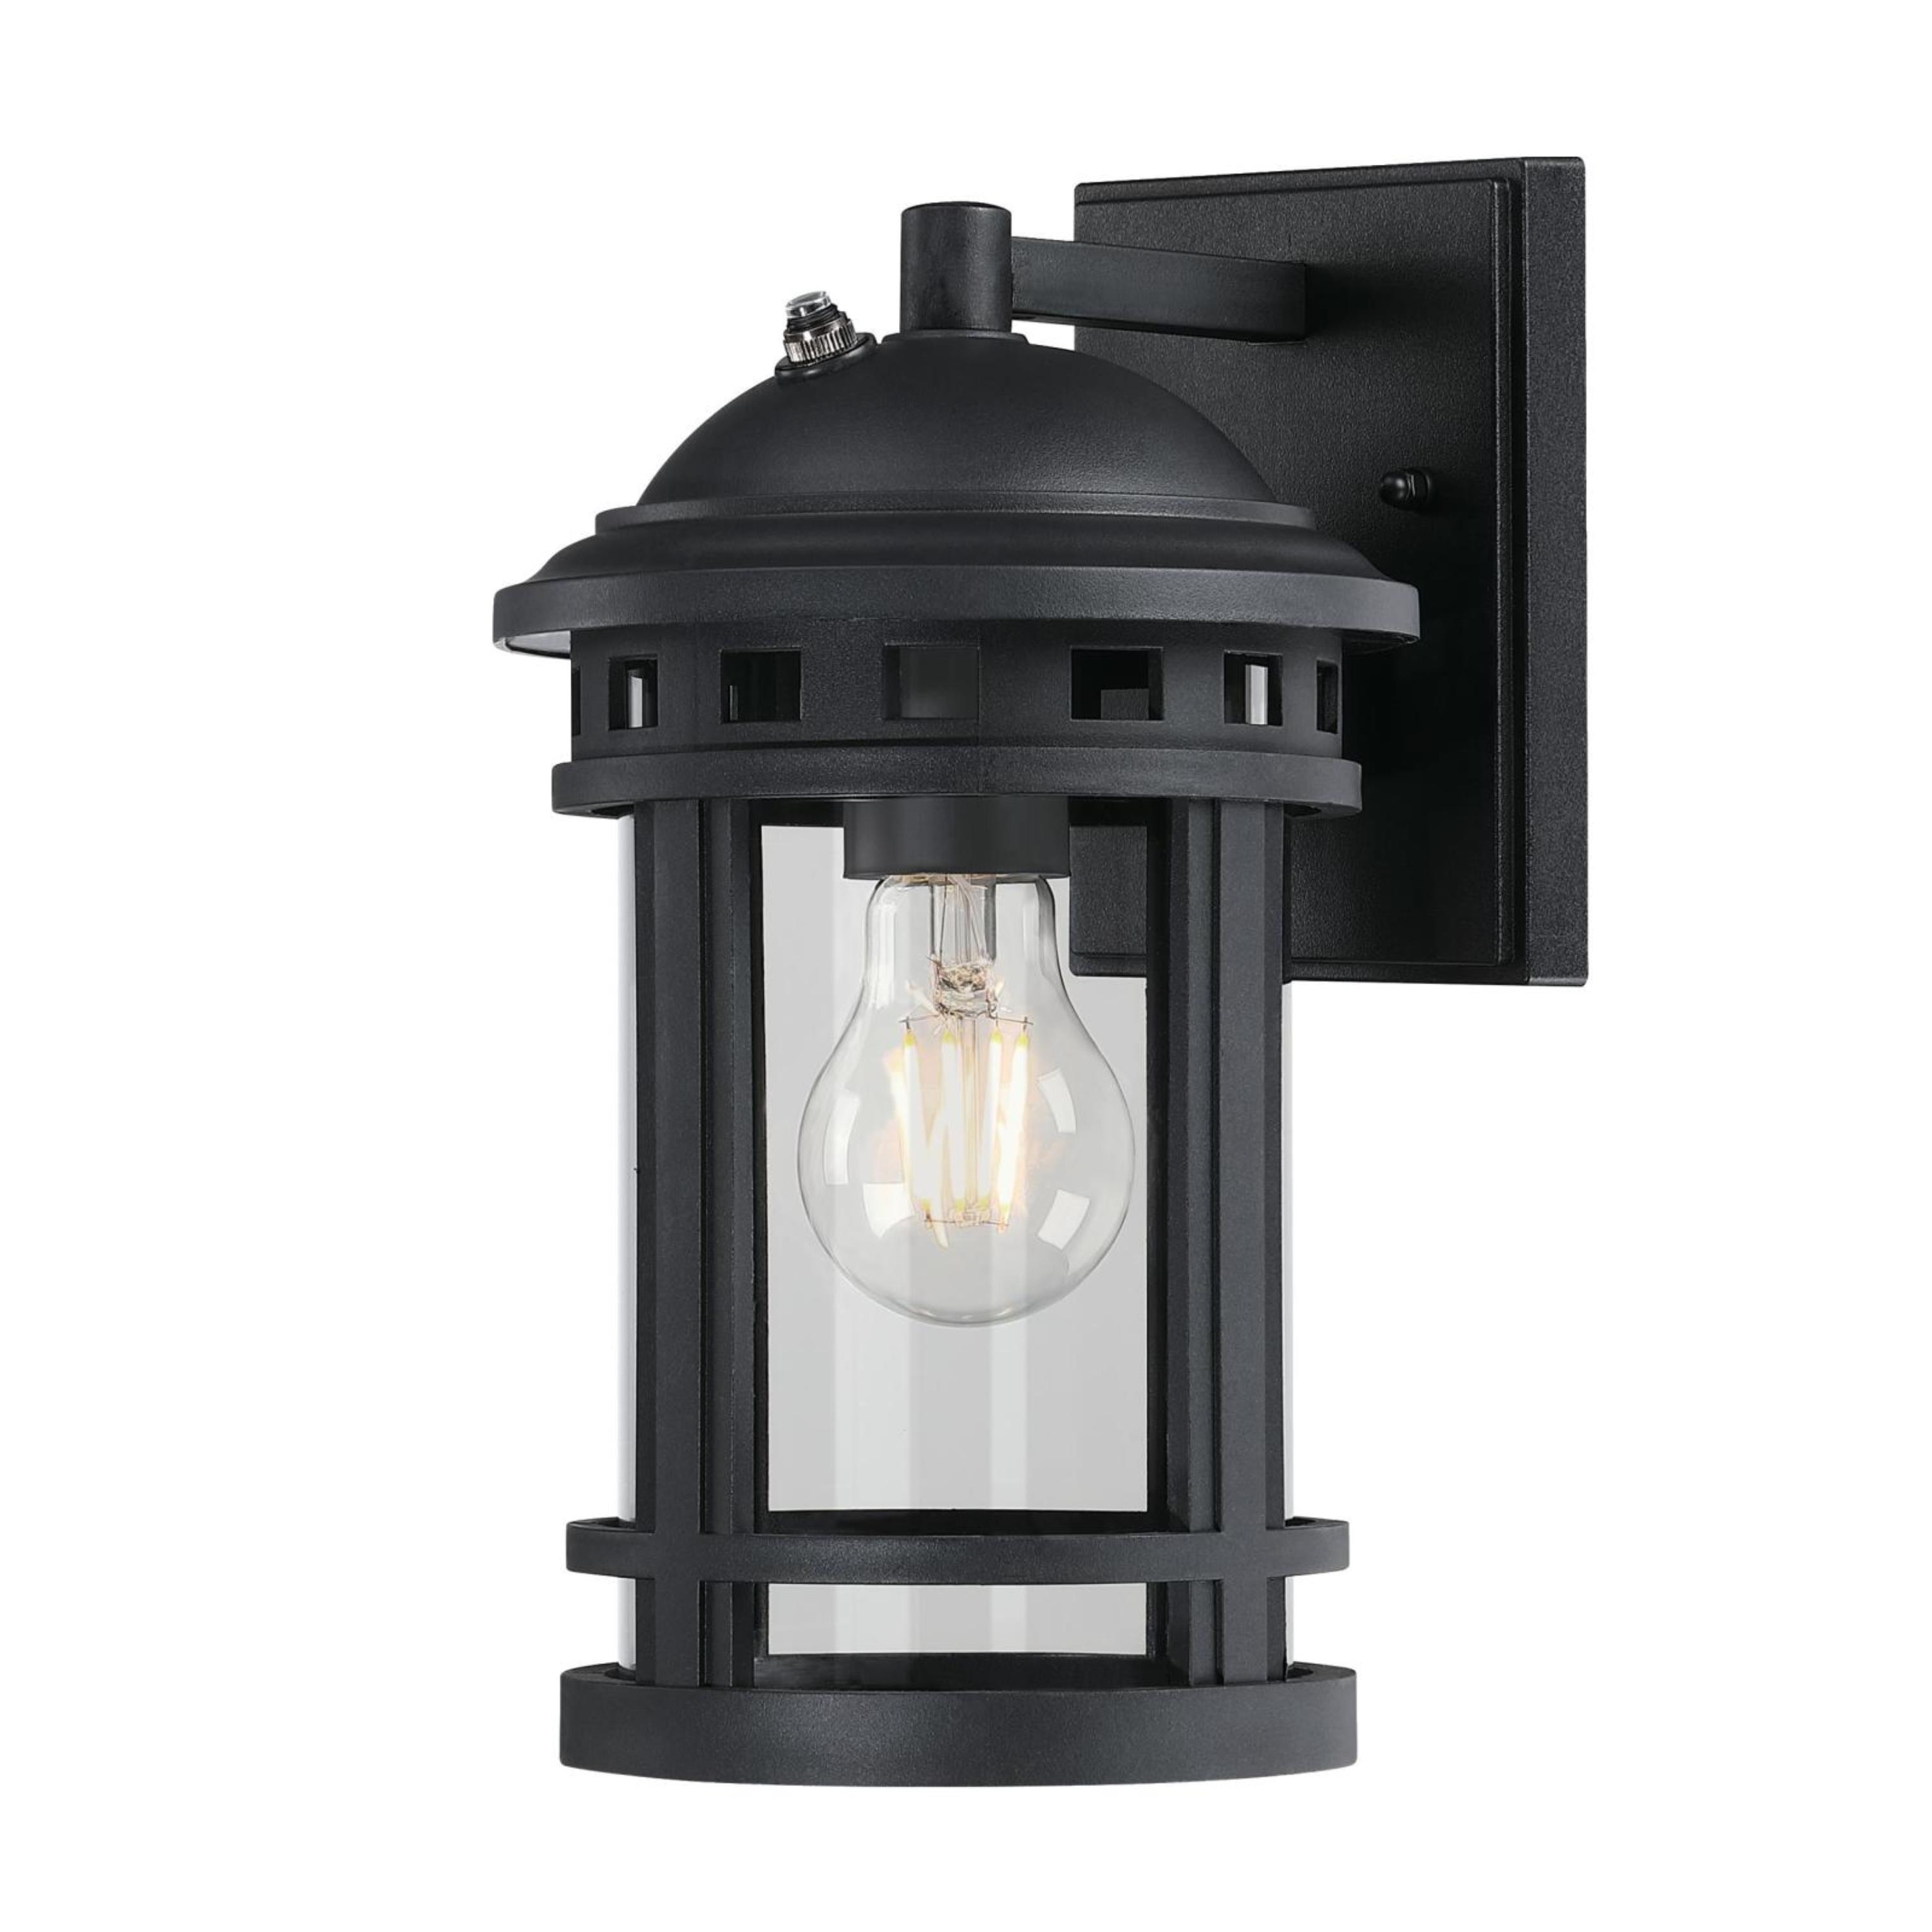 Westinghouse Lighting 6123200 Belon Outdoor Wall Fixture with Dusk to Dawn Sensor, Black - image 2 of 5